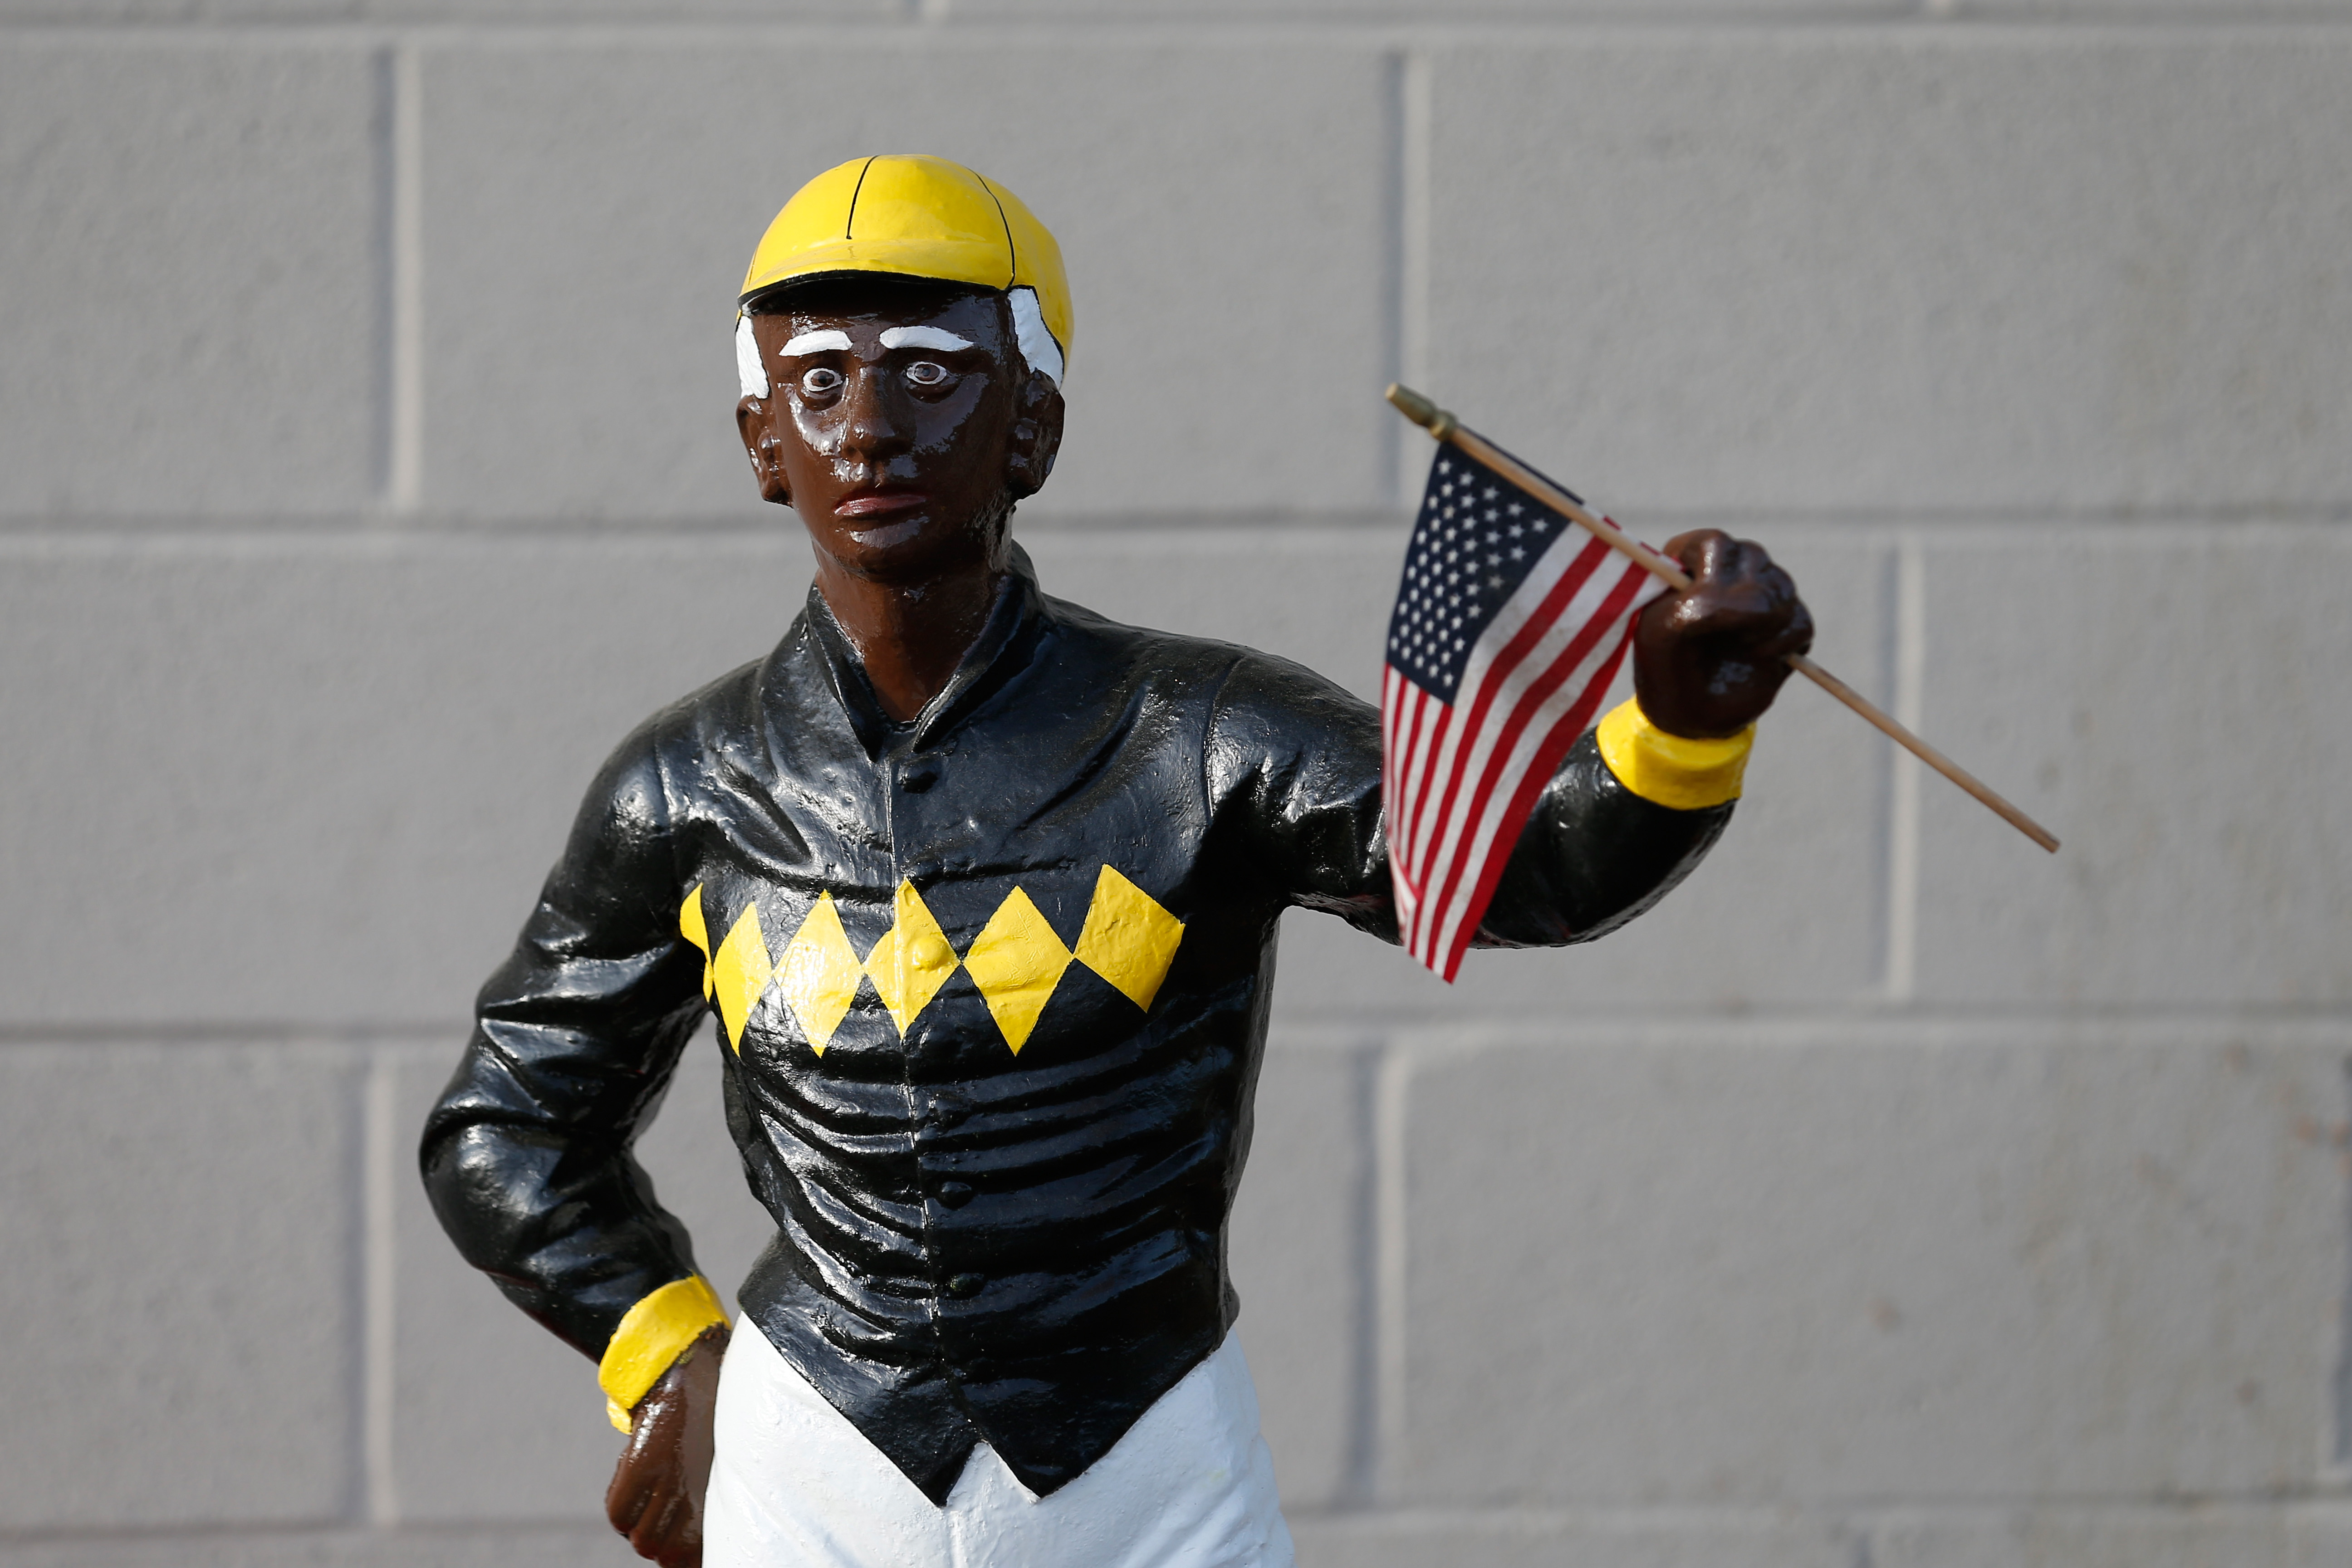 People called this woman racist for her lawn statue, until she